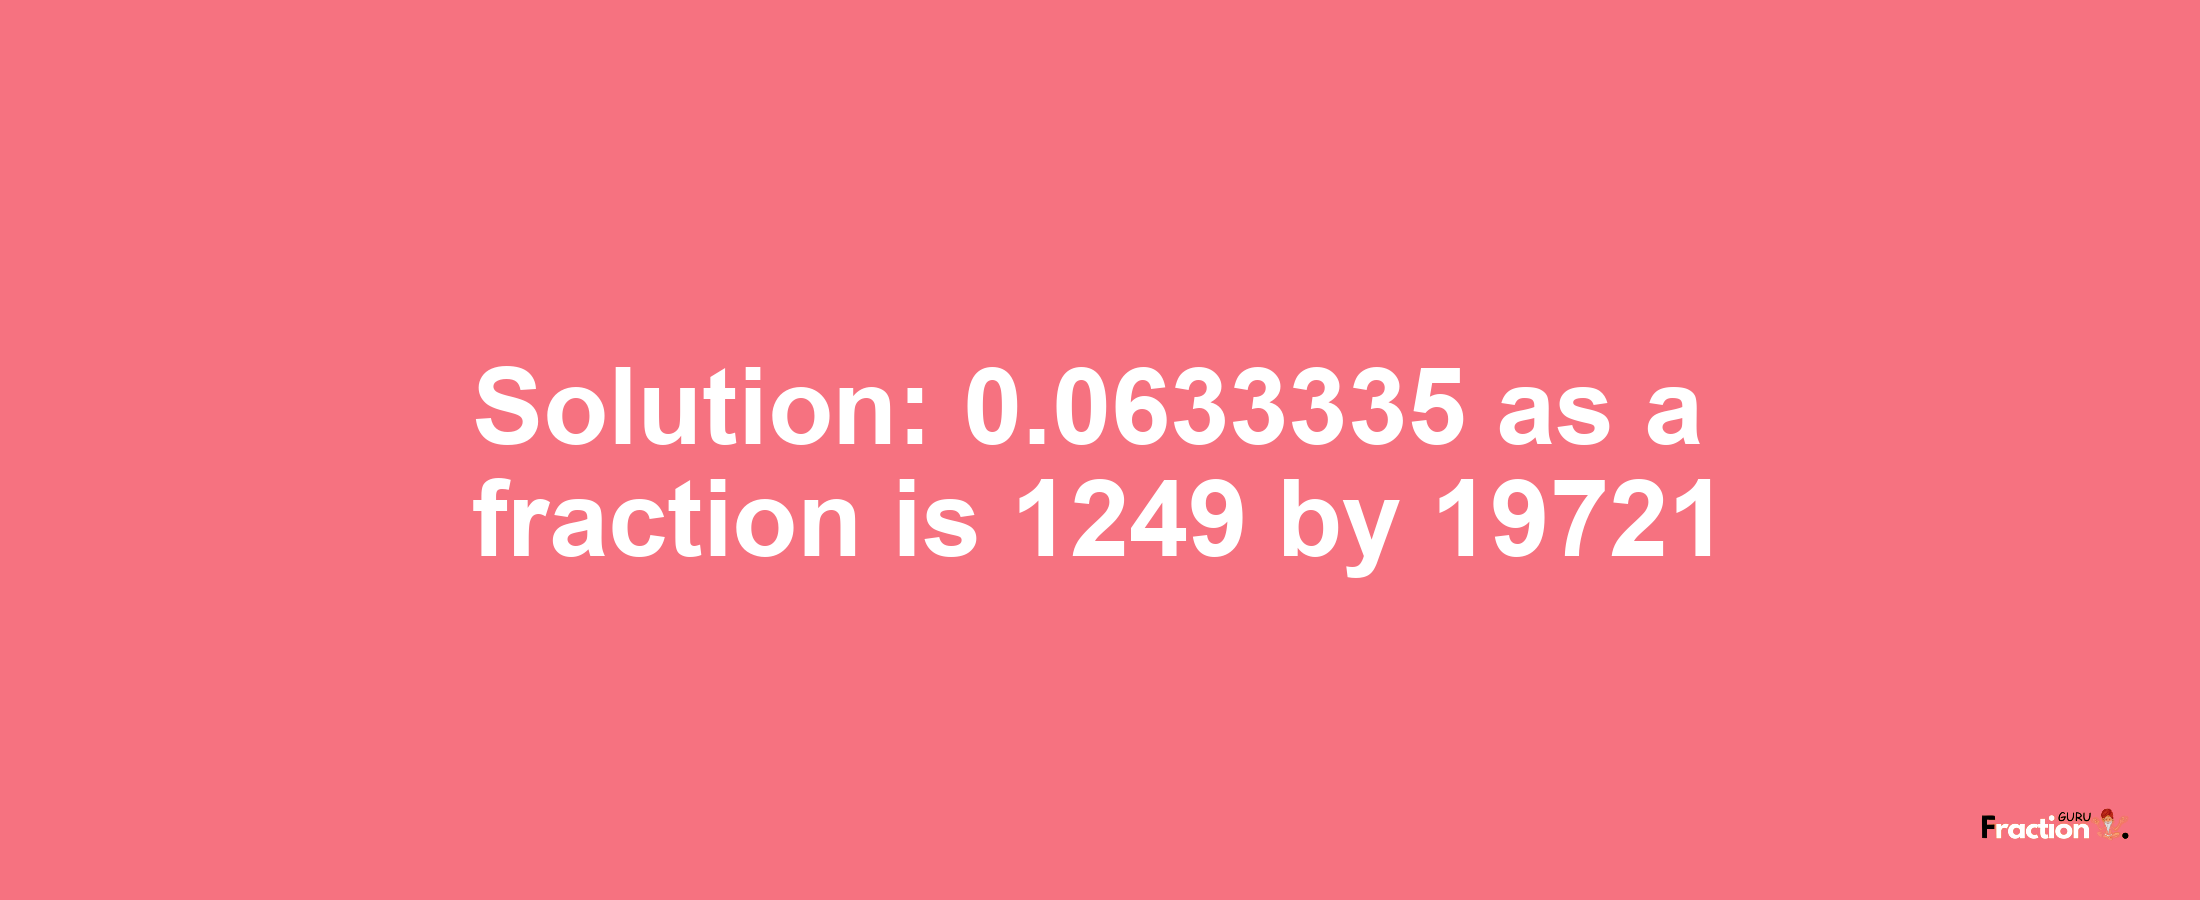 Solution:0.0633335 as a fraction is 1249/19721